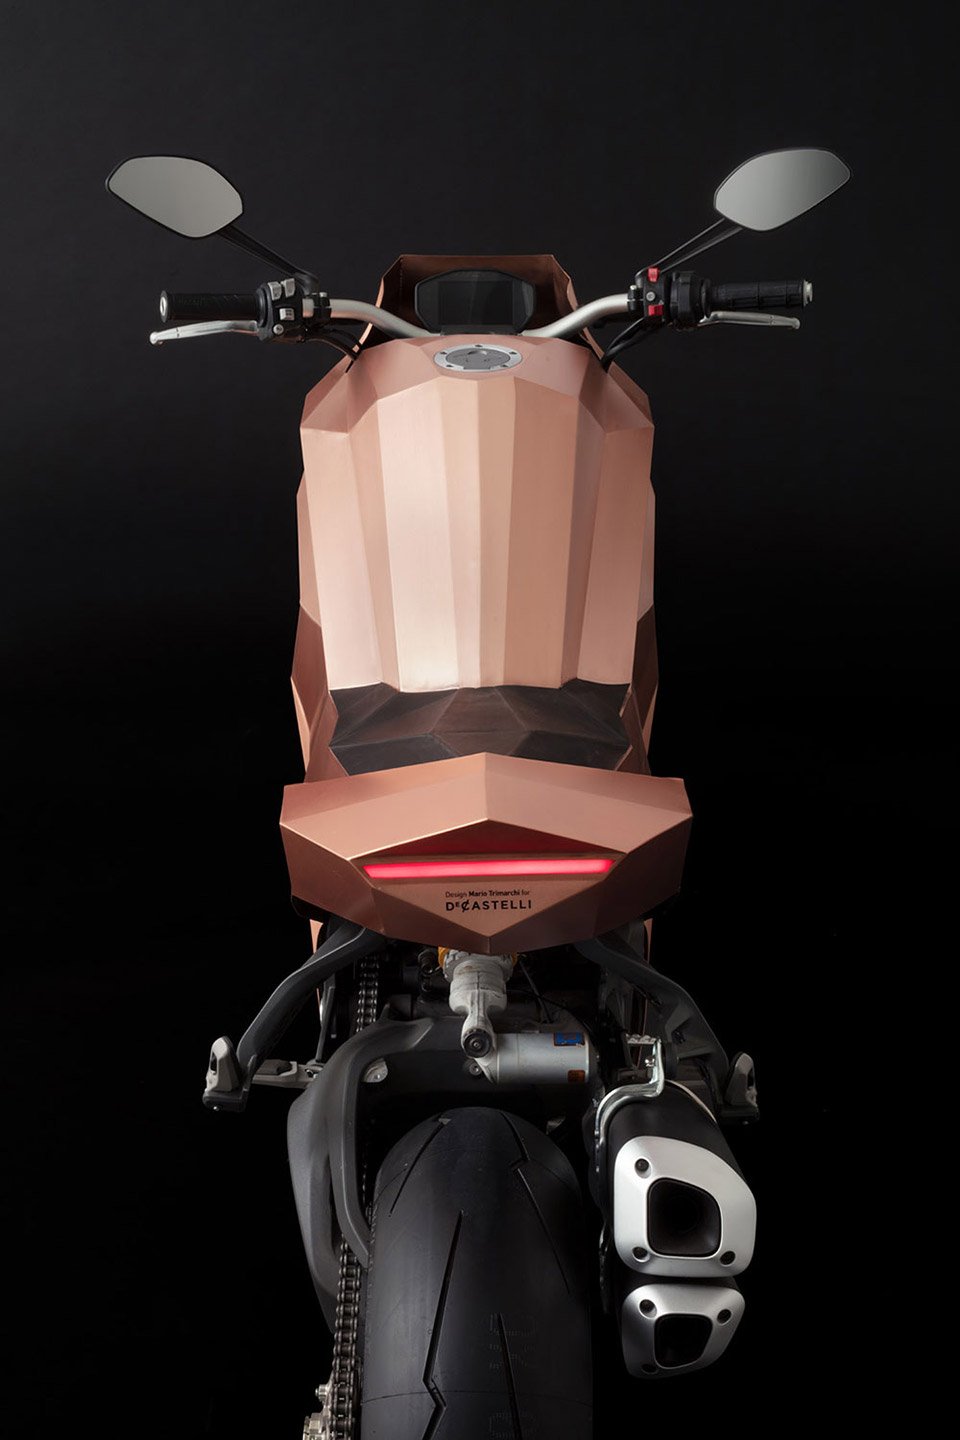 Trimarchi Copper Motorcycle